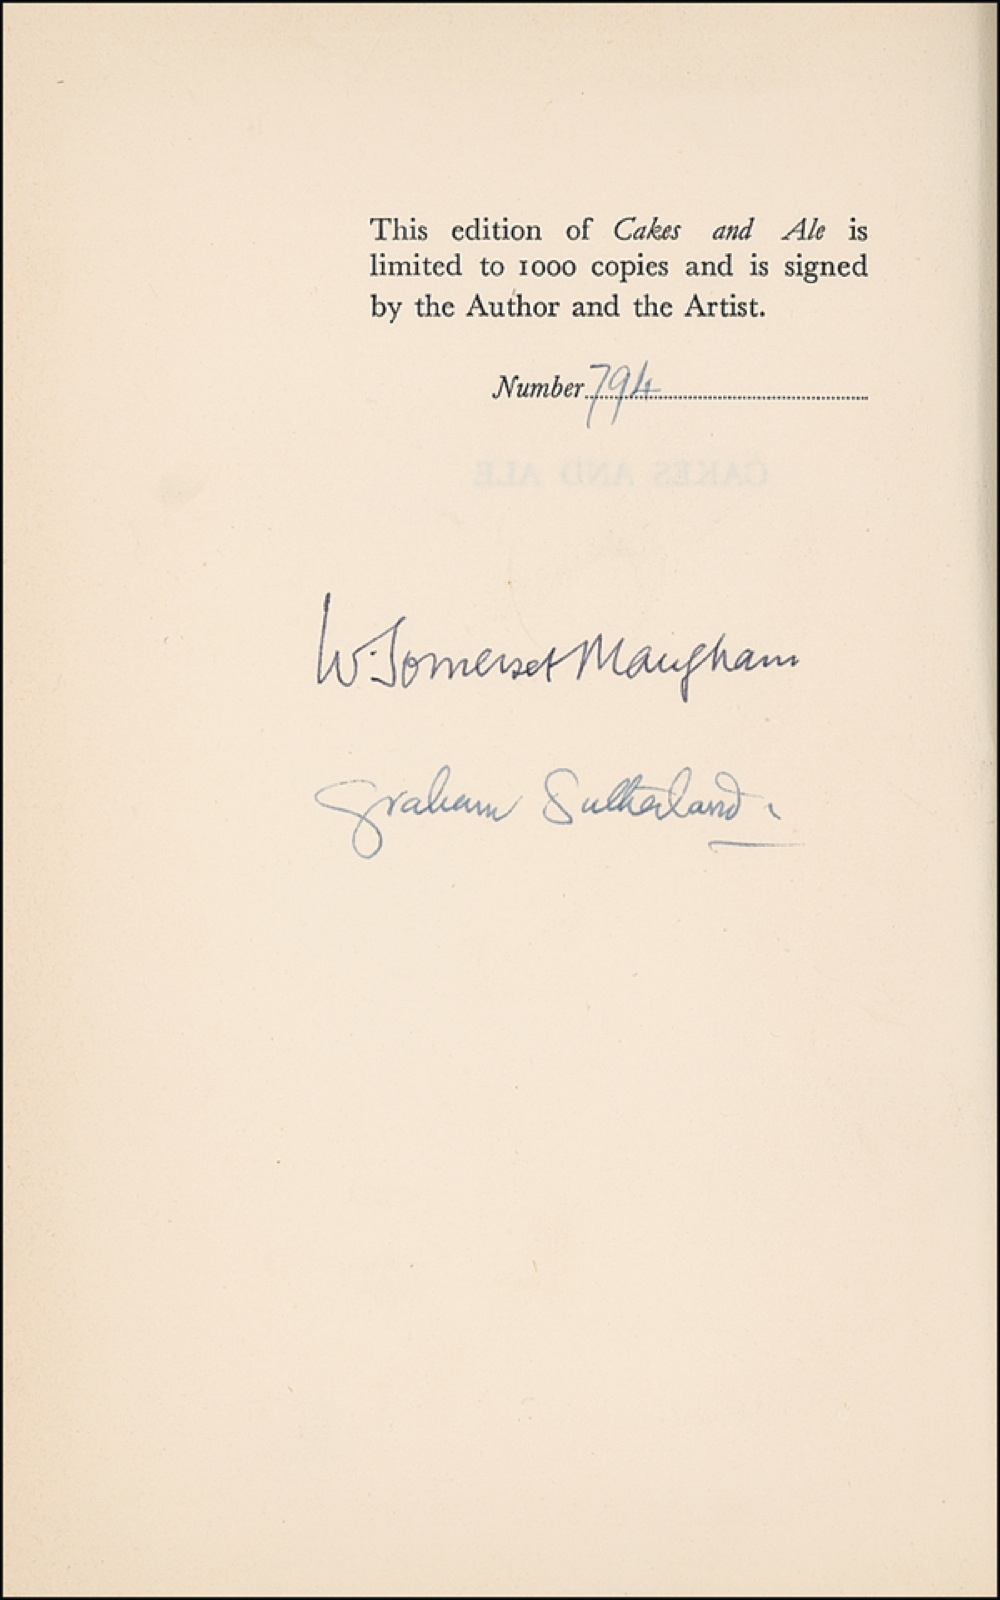 Lot #682 W. Somerset Maugham